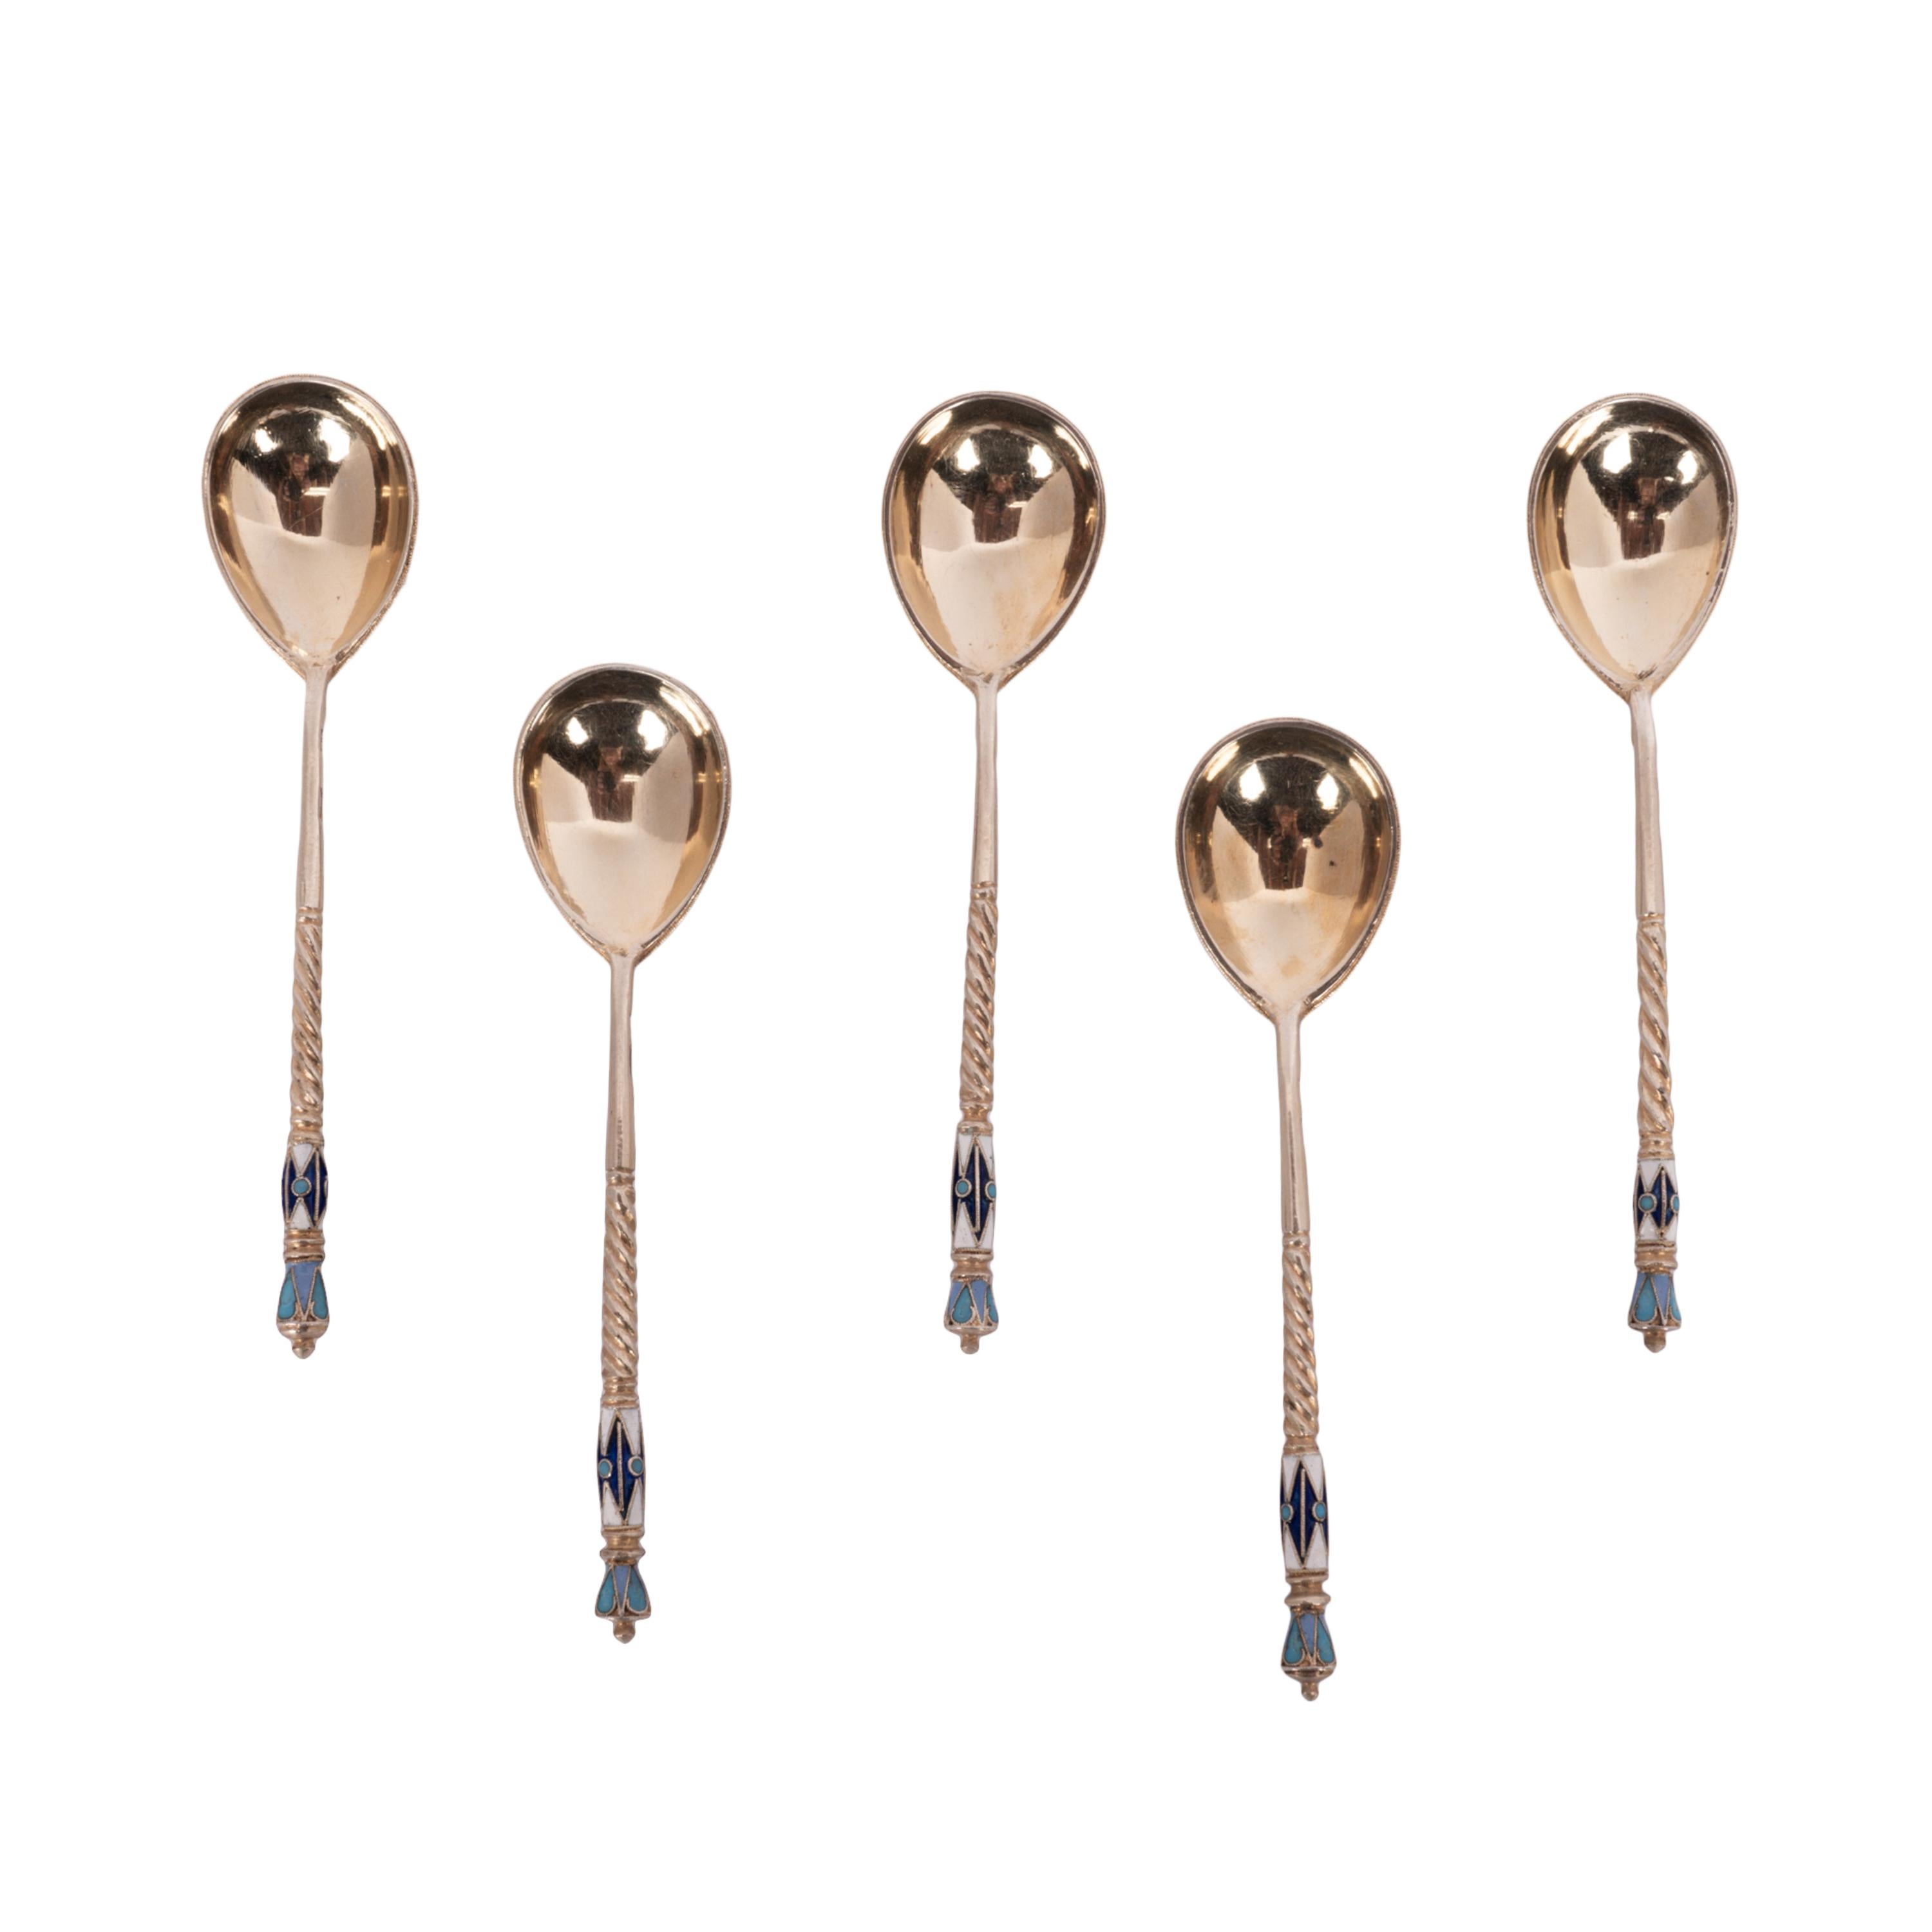 A very good set of five antique Imperial Russian silver-gilt & cloisonne spoons, Moscow, circa 1899.
The spoons having silver-gilt to the interior of the bowls, the back of each spoon is finely decorated in floral cloisonne enamel. The spoon stems